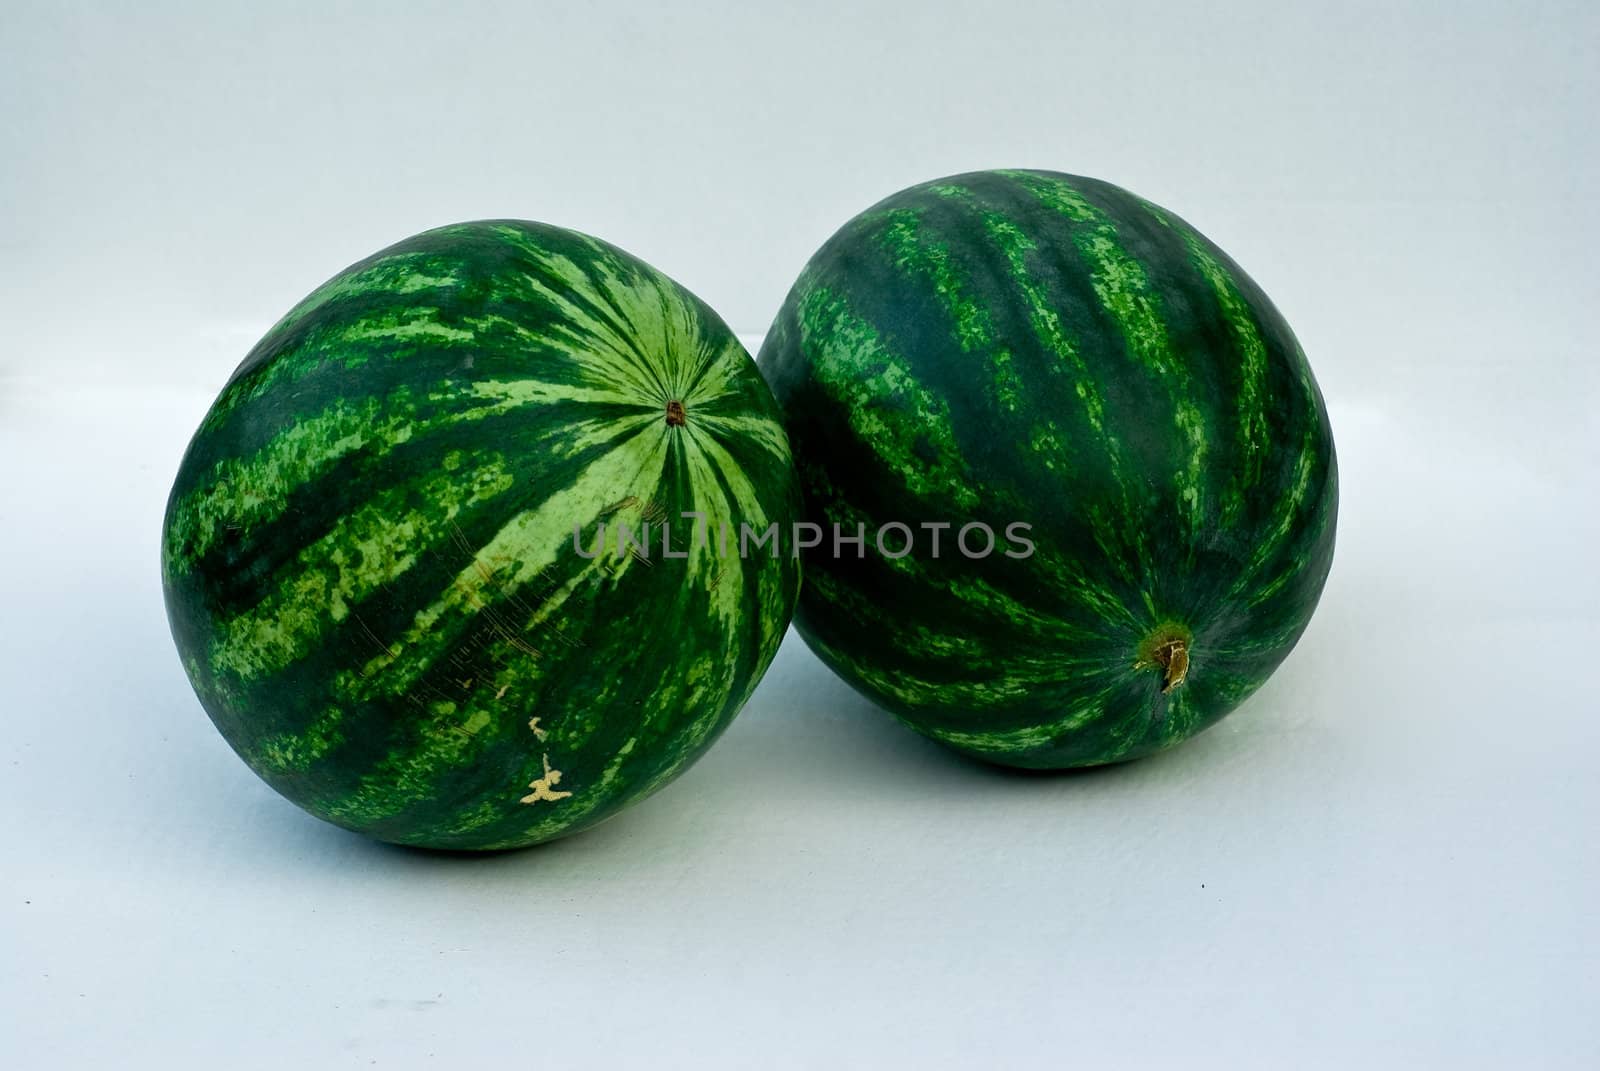 Two green striped watermelons